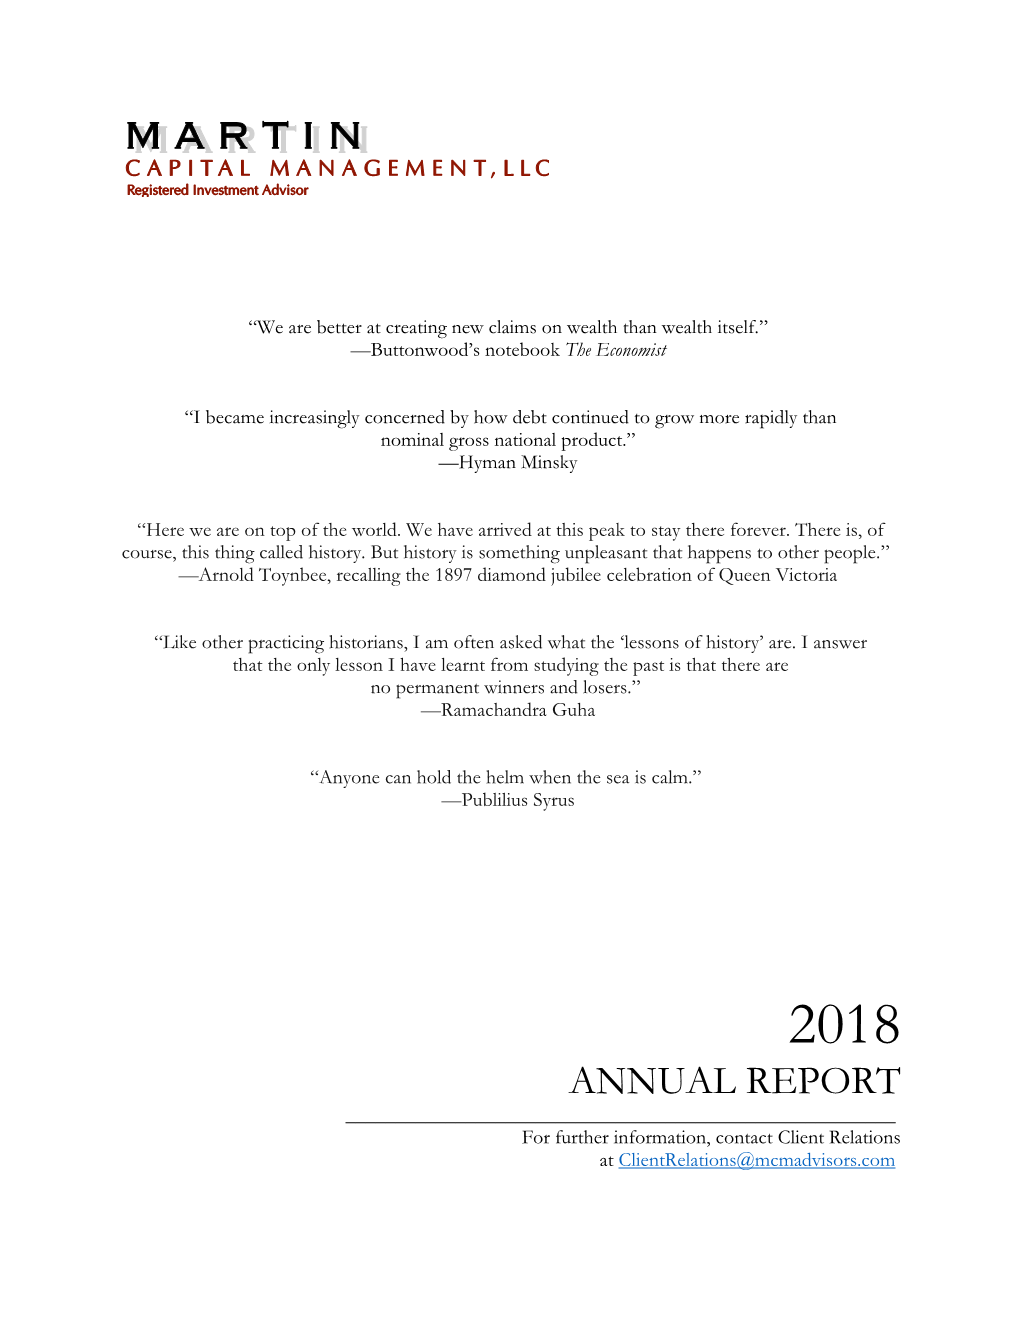 ANNUAL REPORT ______For Further Information, Contact Client Relations at Clientrelations@Mcmadvisors.Com